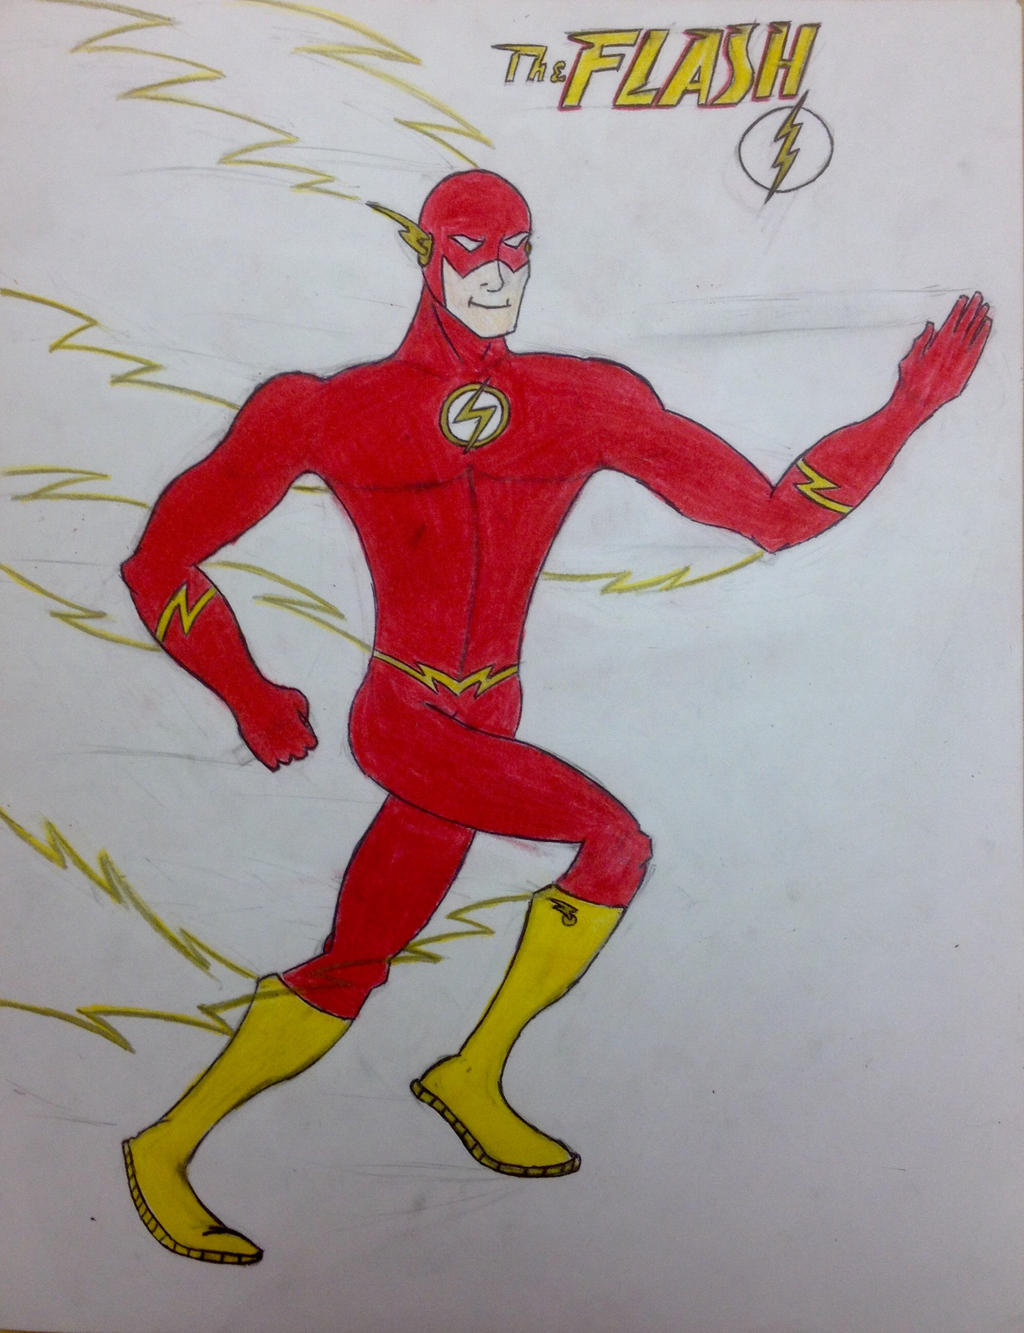 The Flash- First run (Colored) by Coffee-Cheese on DeviantArt